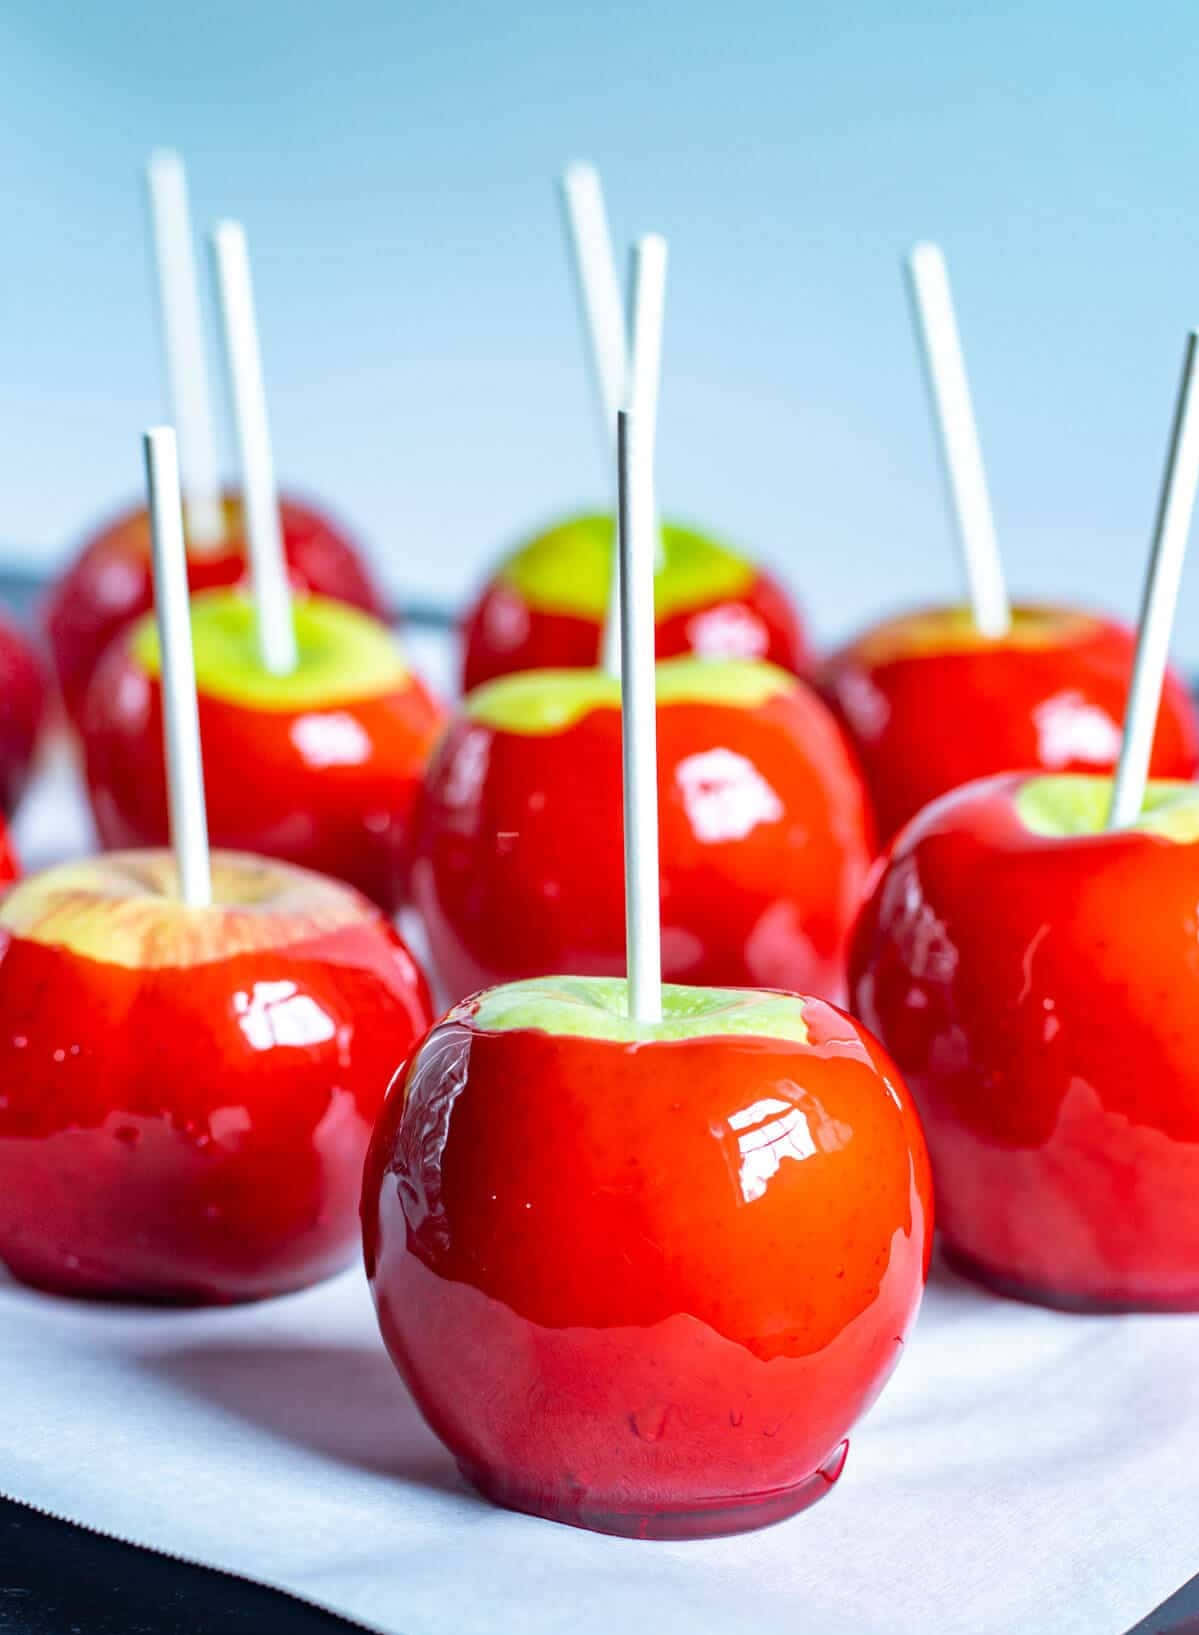 Delicious Candy Apples Ready to Enjoy Wallpaper